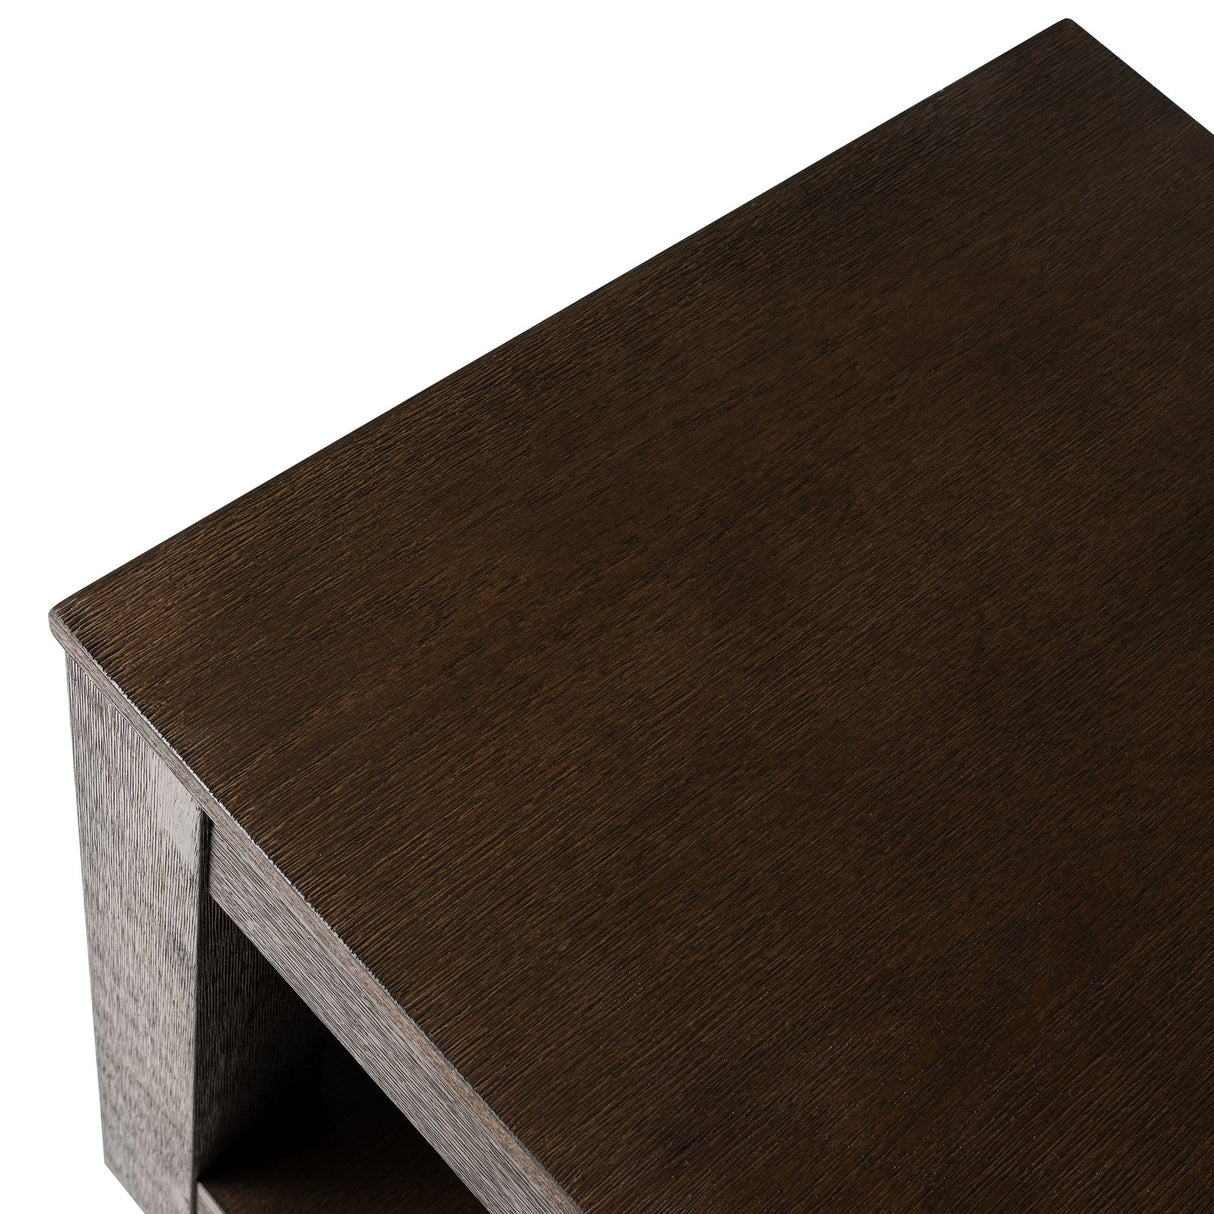 Maven Lane Paulo Wooden Side Table in Weathered Brown Finish